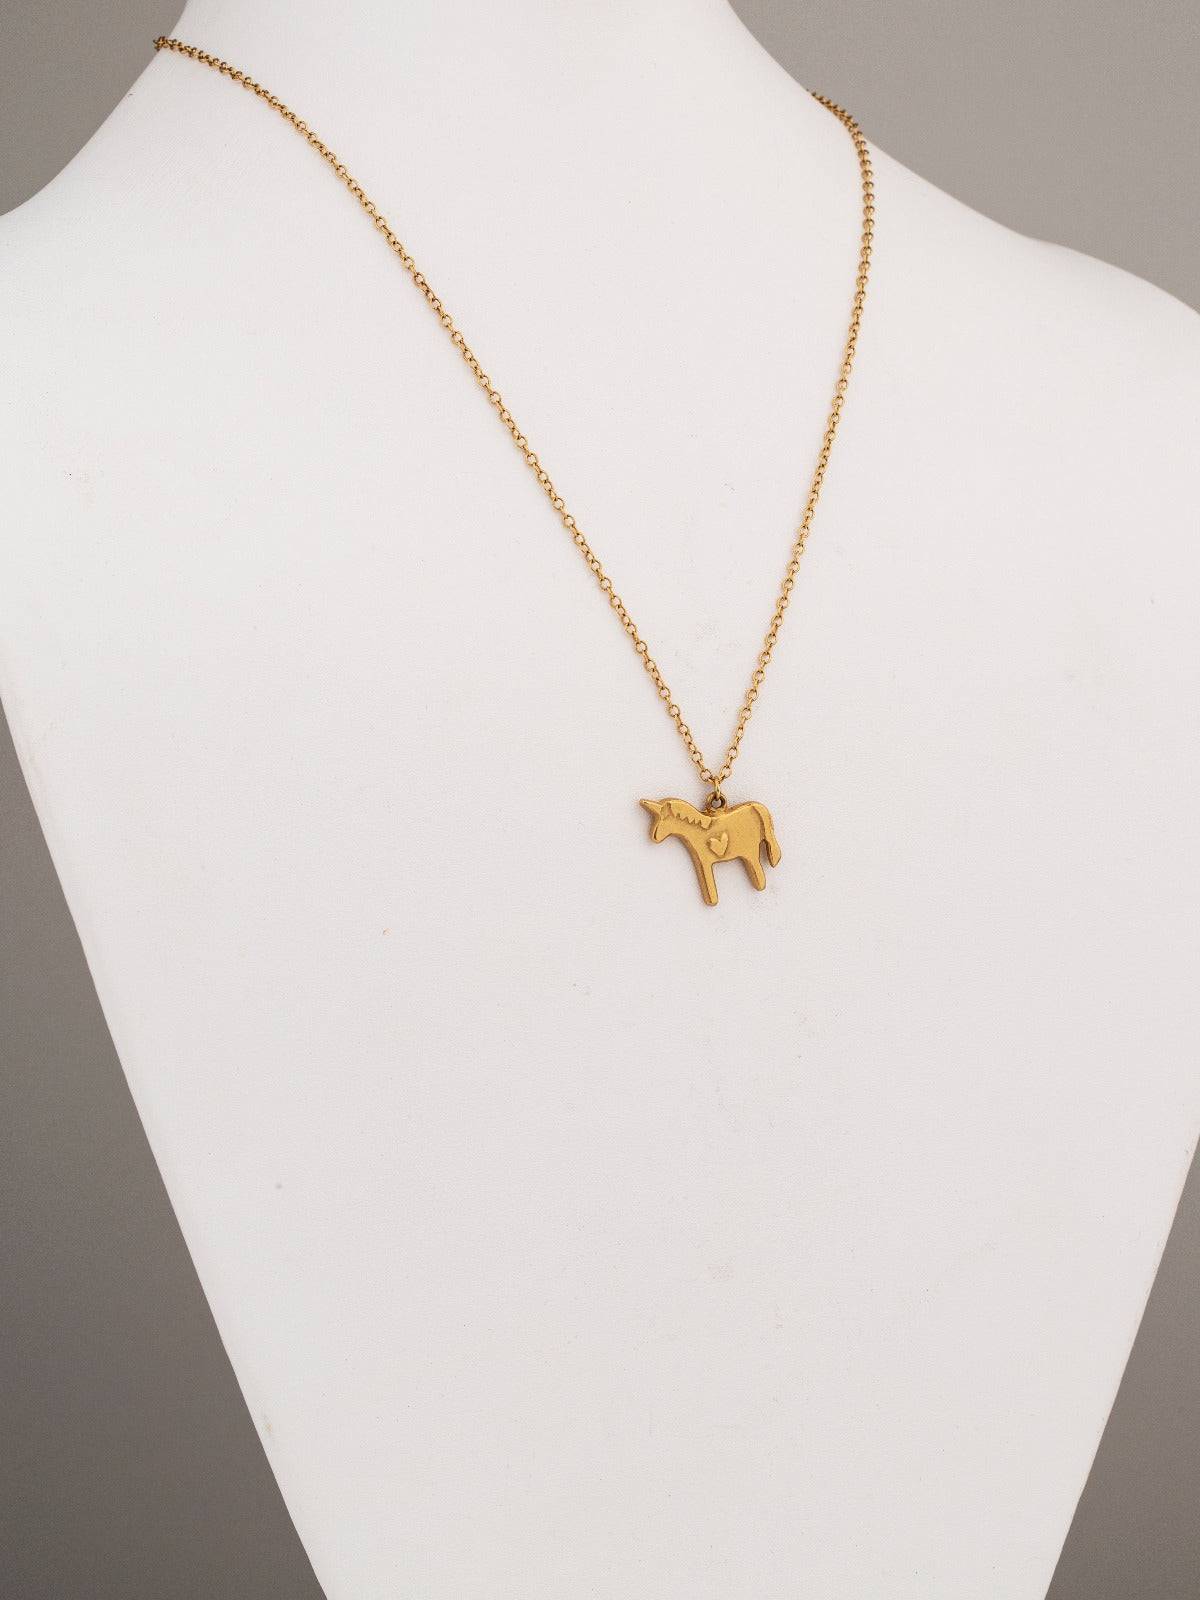 Believe in You Necklace-Gold